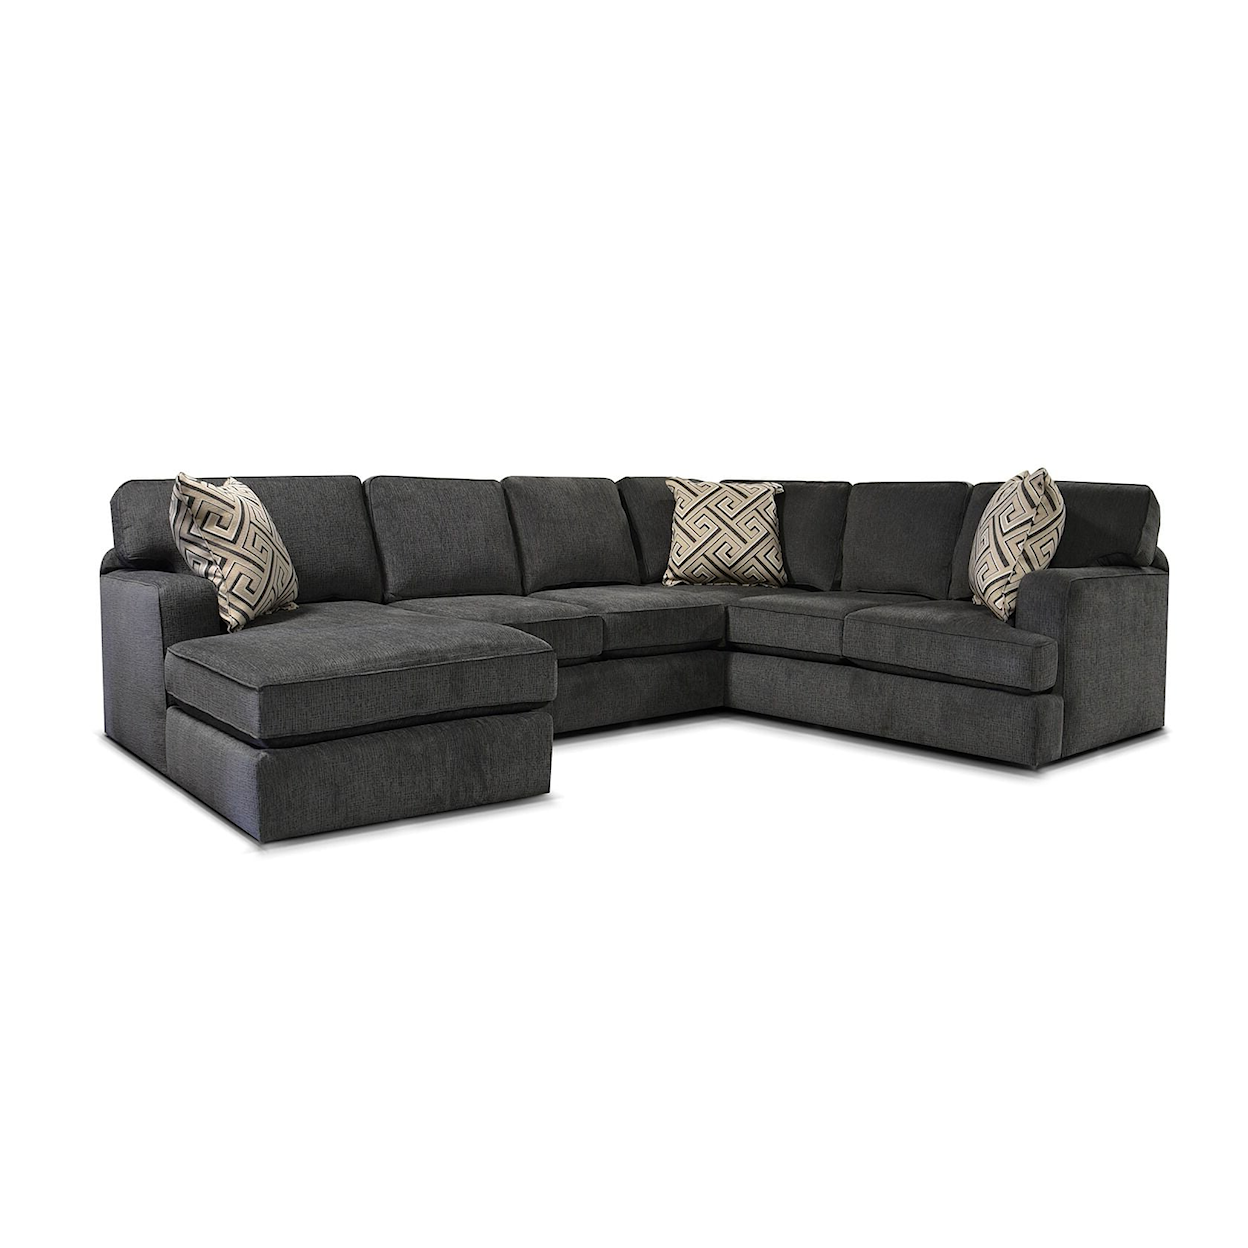 England Rouse 3-Piece Chaise Sectional Sofa